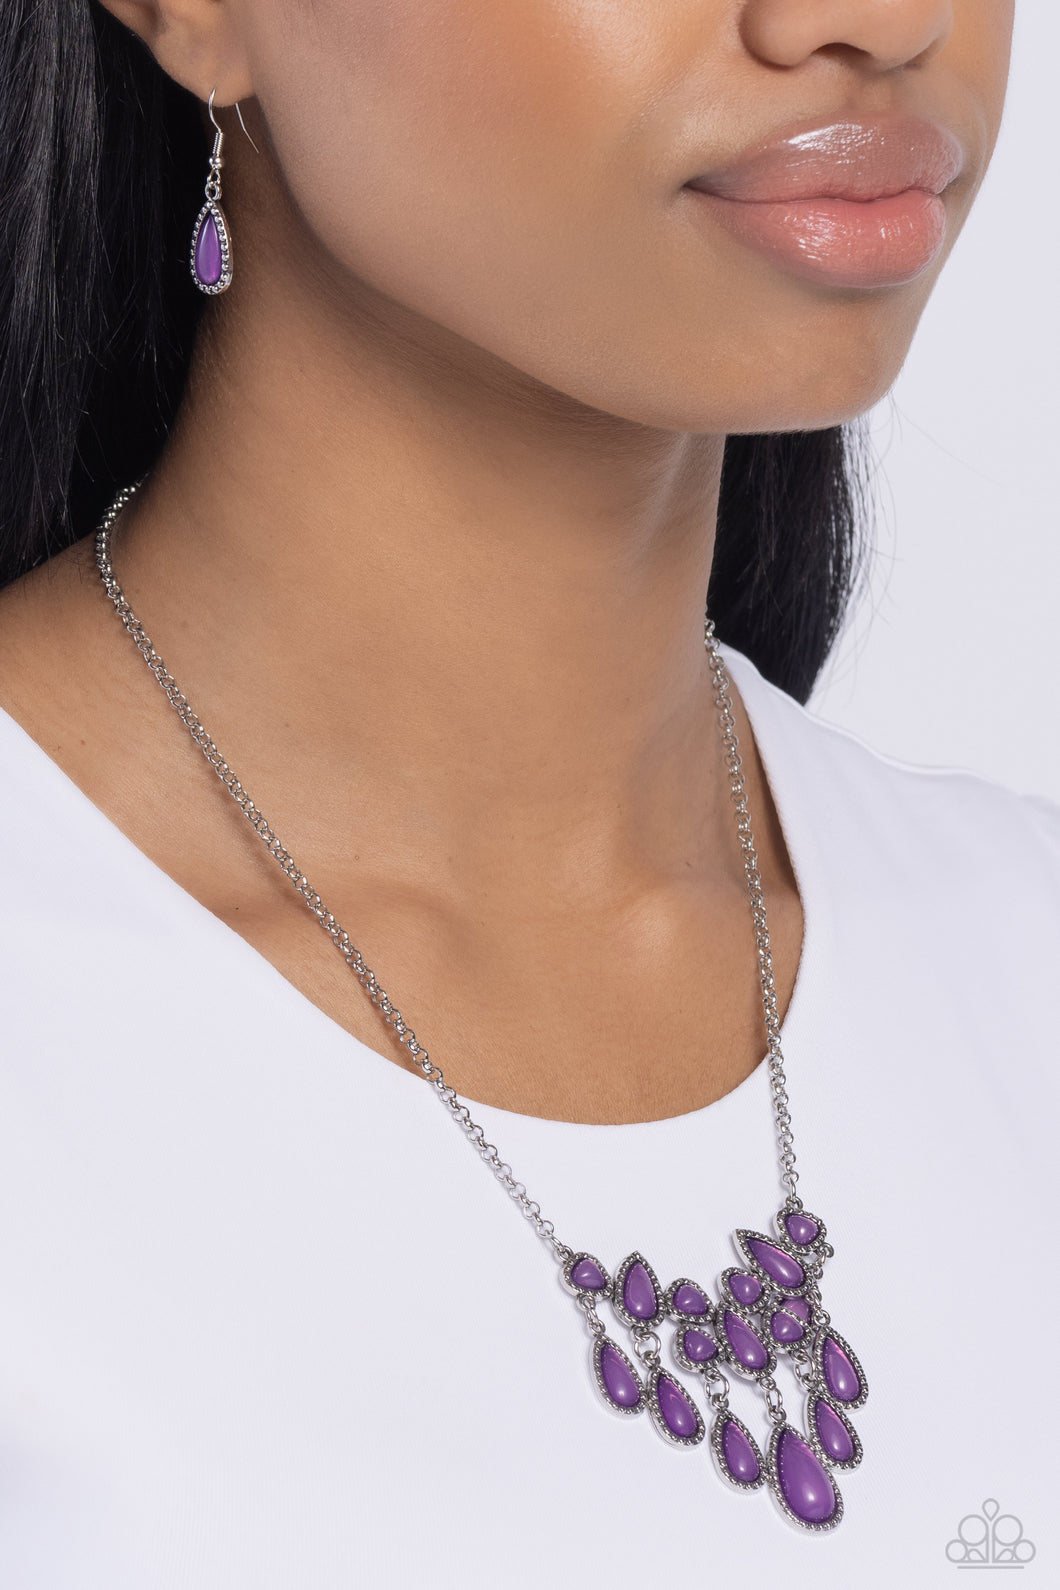 Paparazzi “Exceptionally Ethereal” Purple Necklace Earring Set